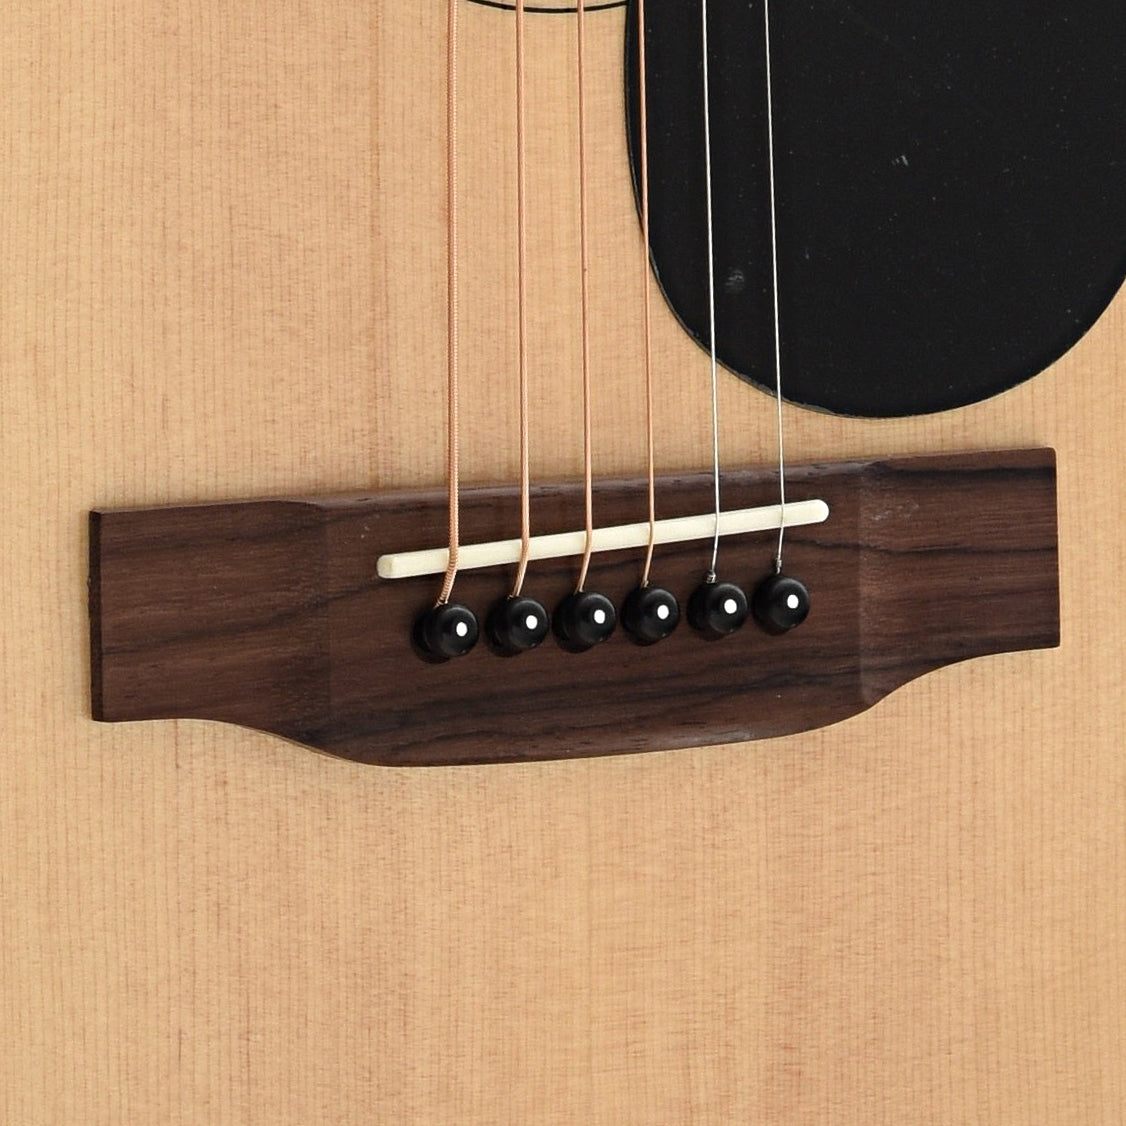 Image 3 of Blueridge Contemporary Series BR-41 "Baby" Acoustic Guitar - SKU# BR41 : Product Type Flat-top Guitars : Elderly Instruments